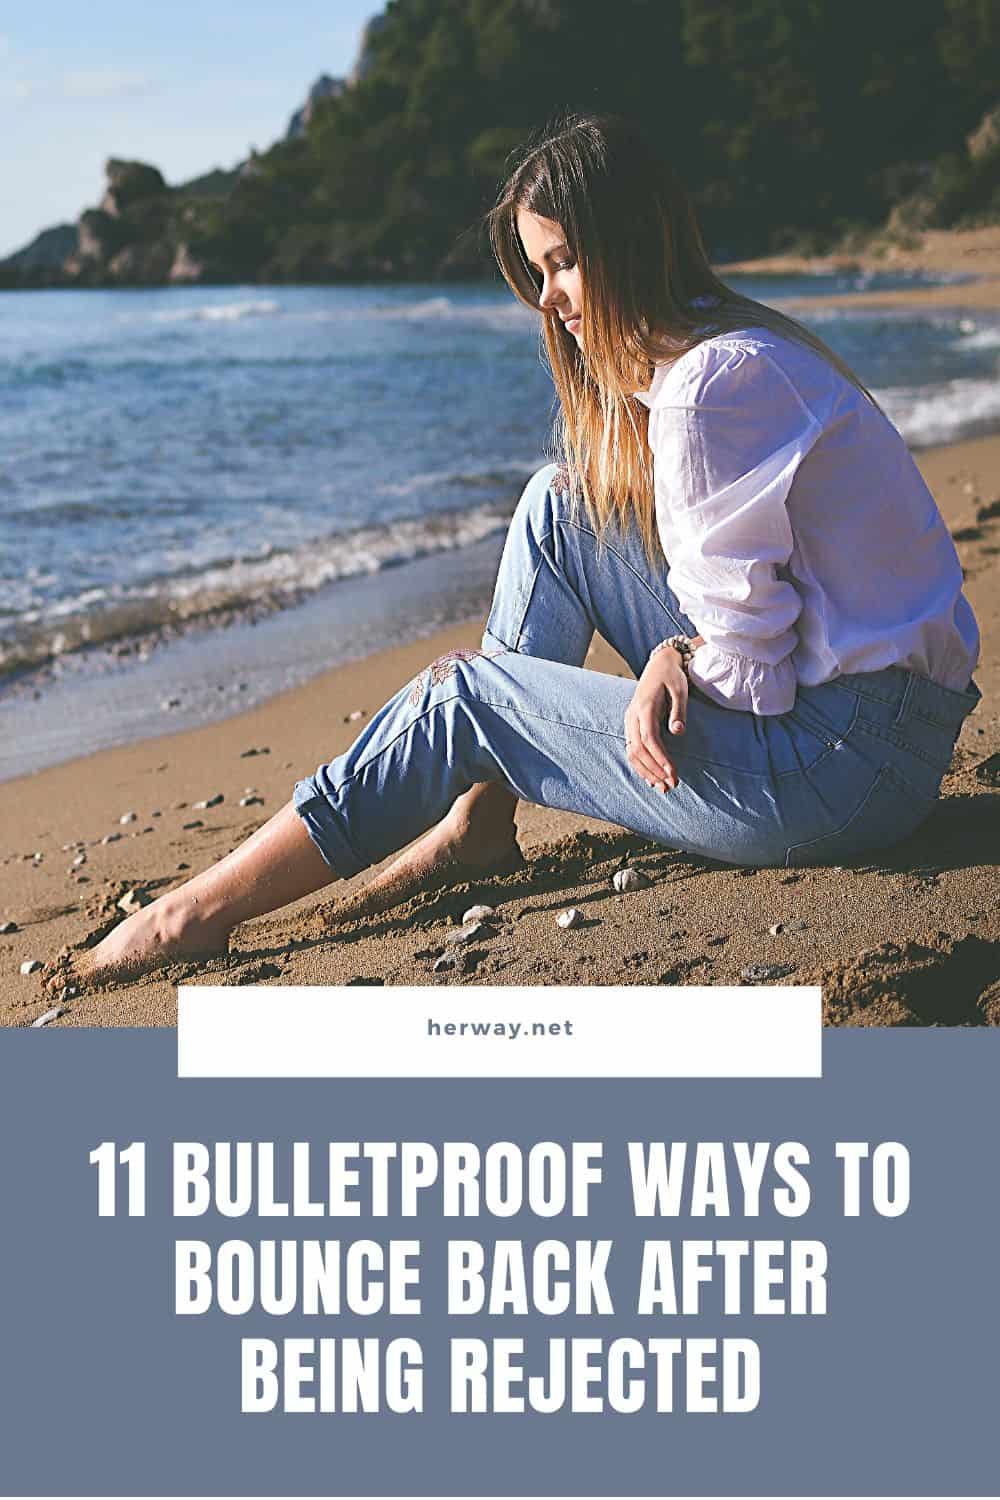 11 Bulletproof Ways To Bounce Back After Being Rejected